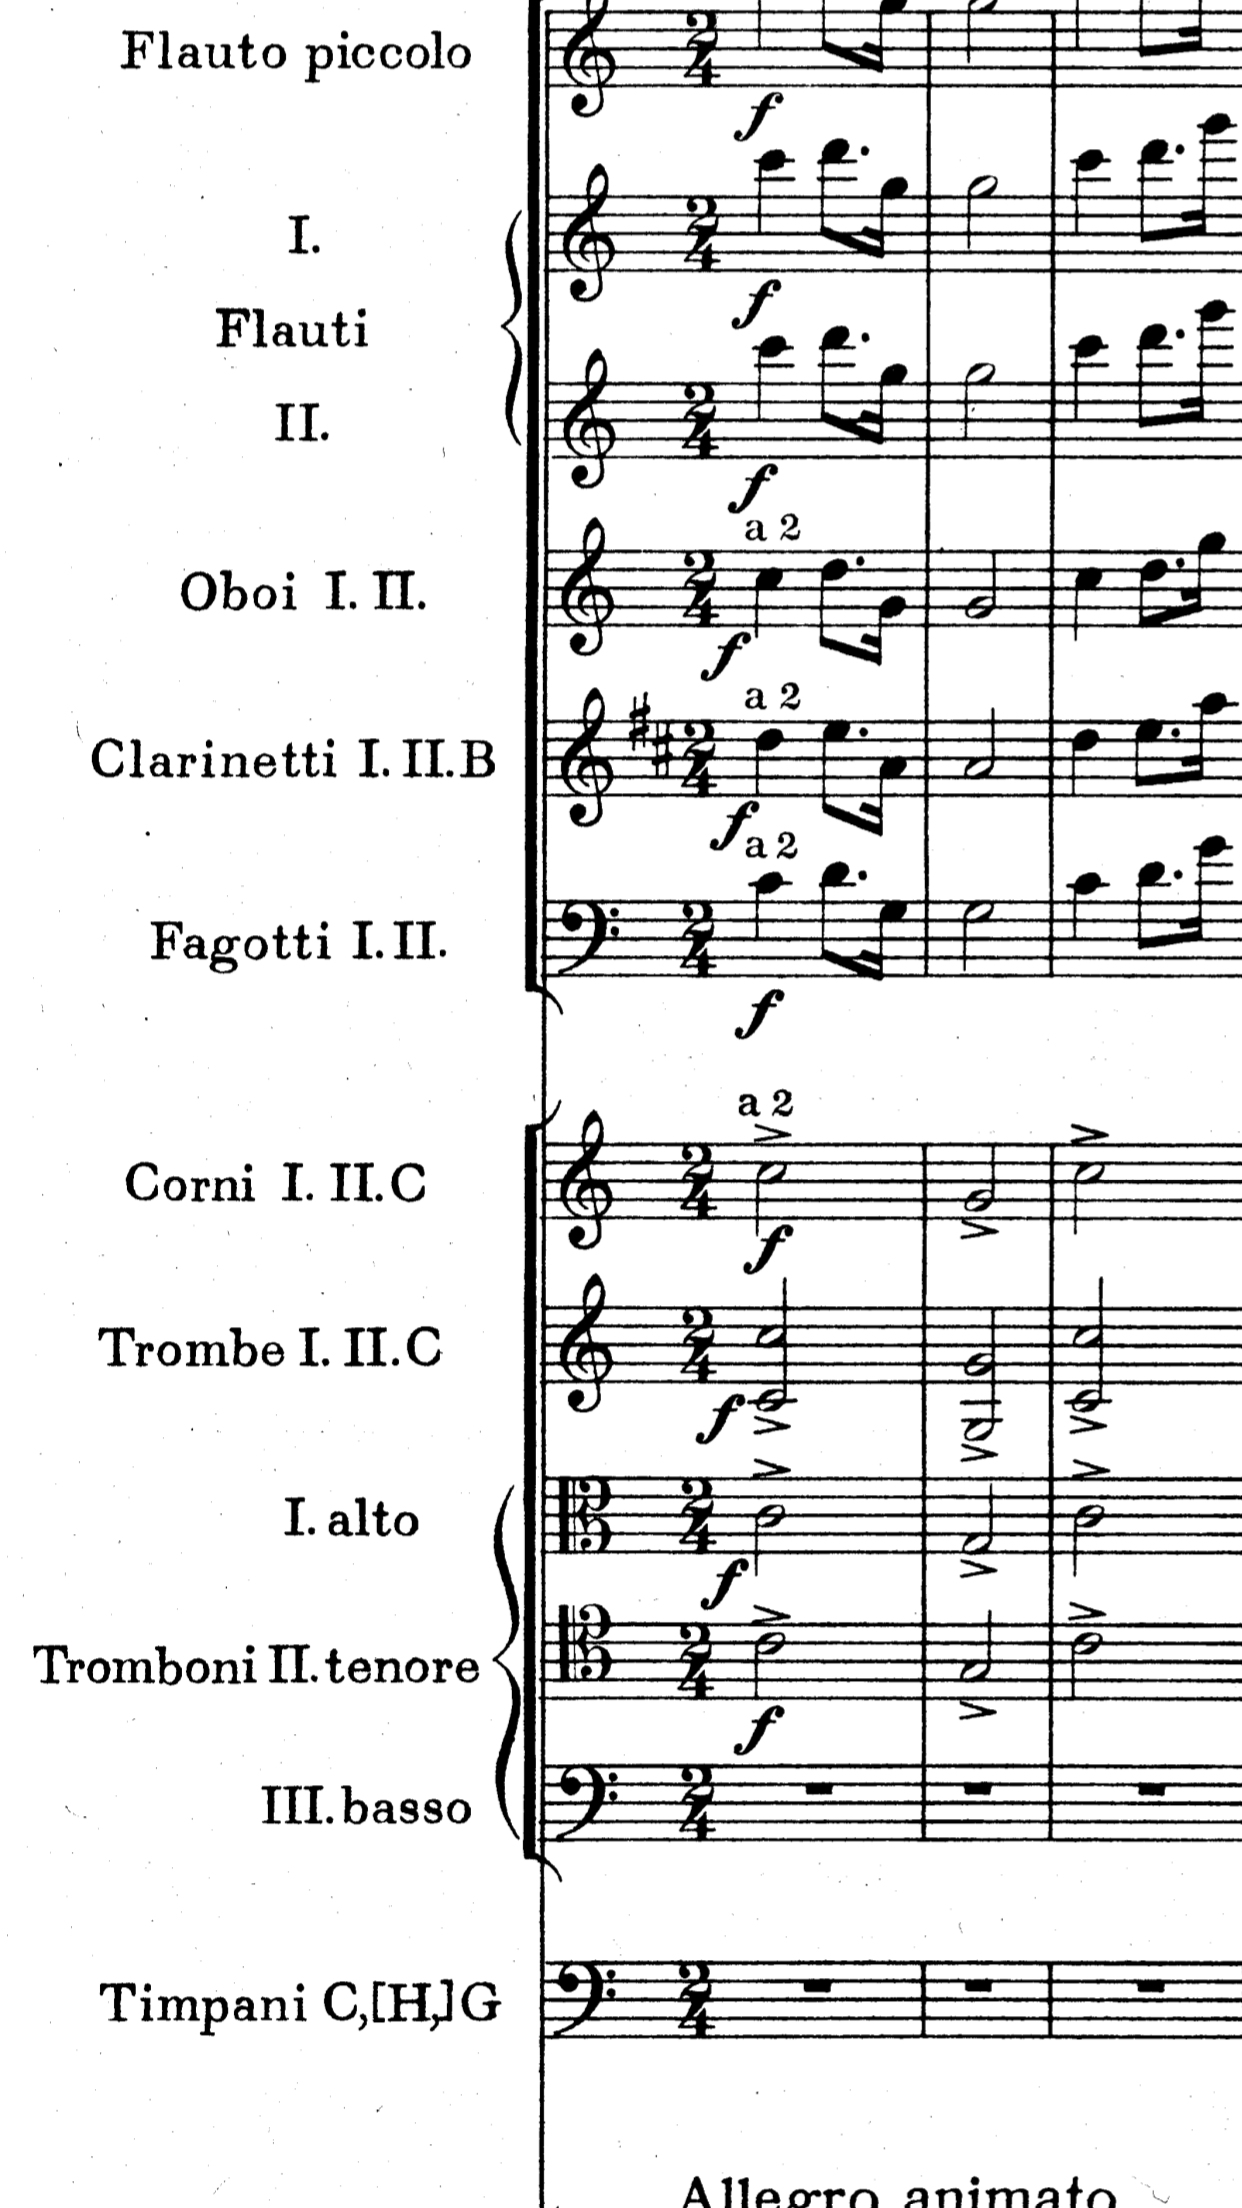 Horn in C transposition MuseScore